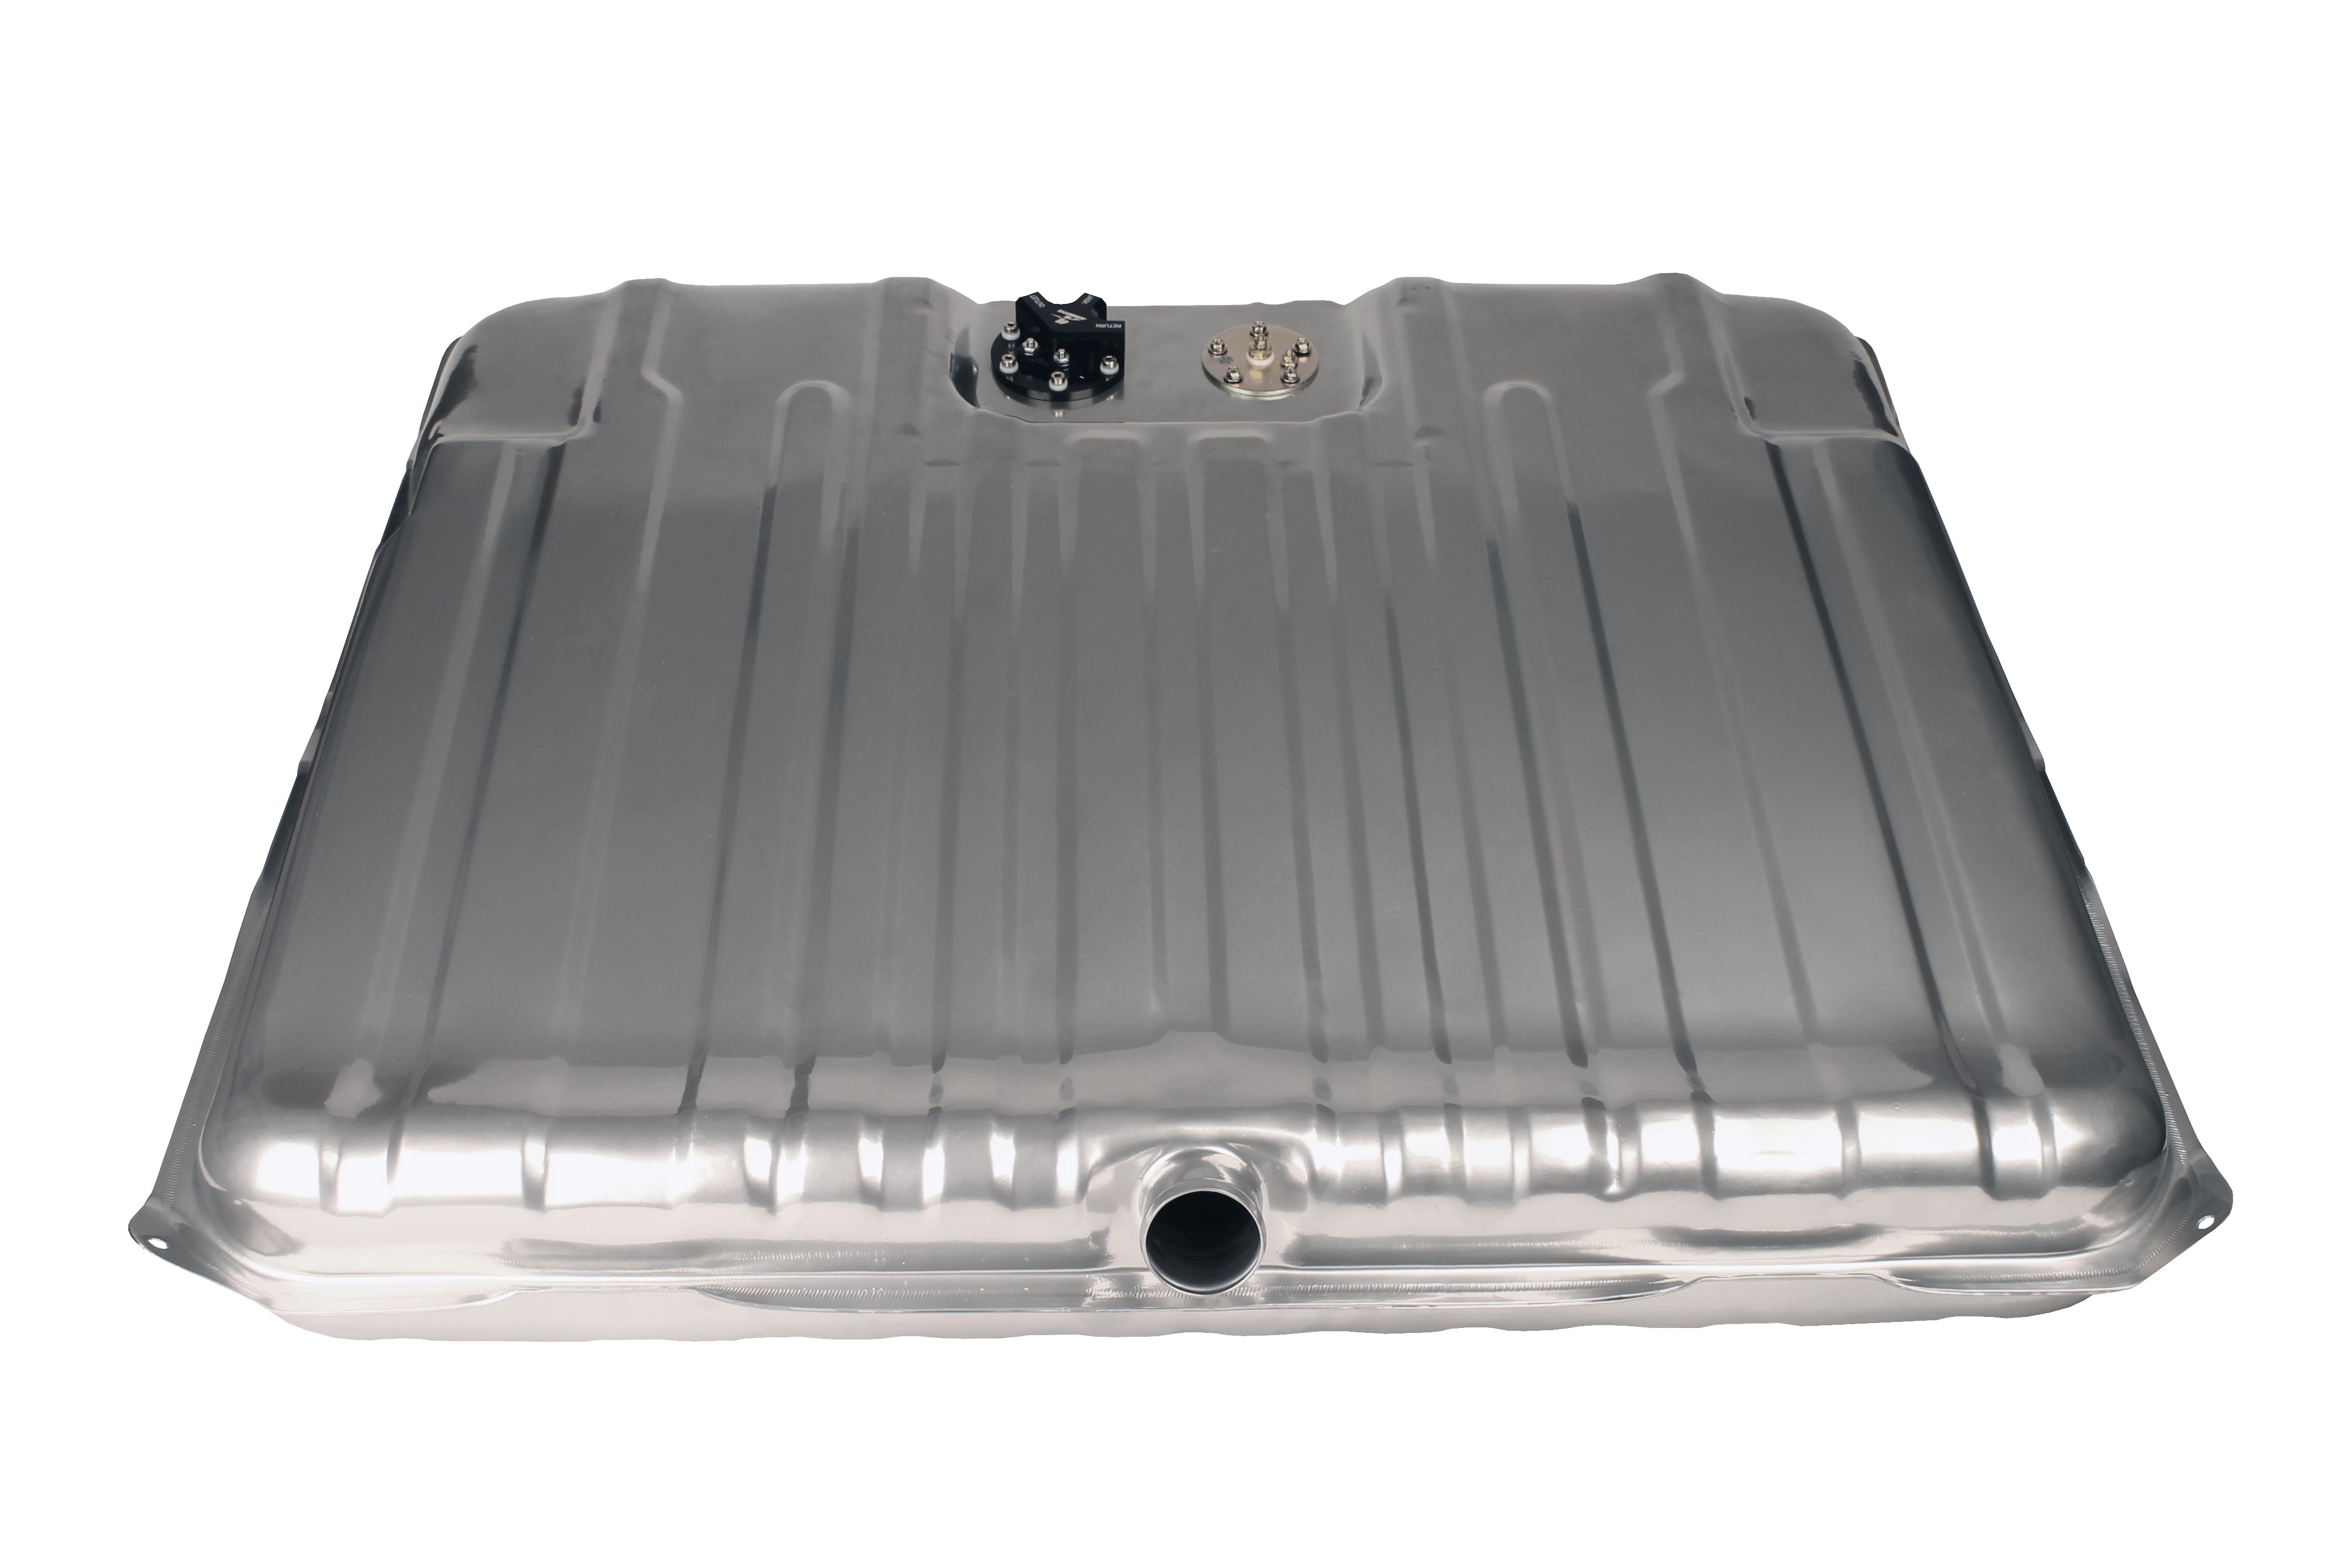 Aeromotive Fuel System 18317 Fuel Tank, 340 Stealth, 64-67 Chevelle and; Malibu, 1 inch deeper than OEM